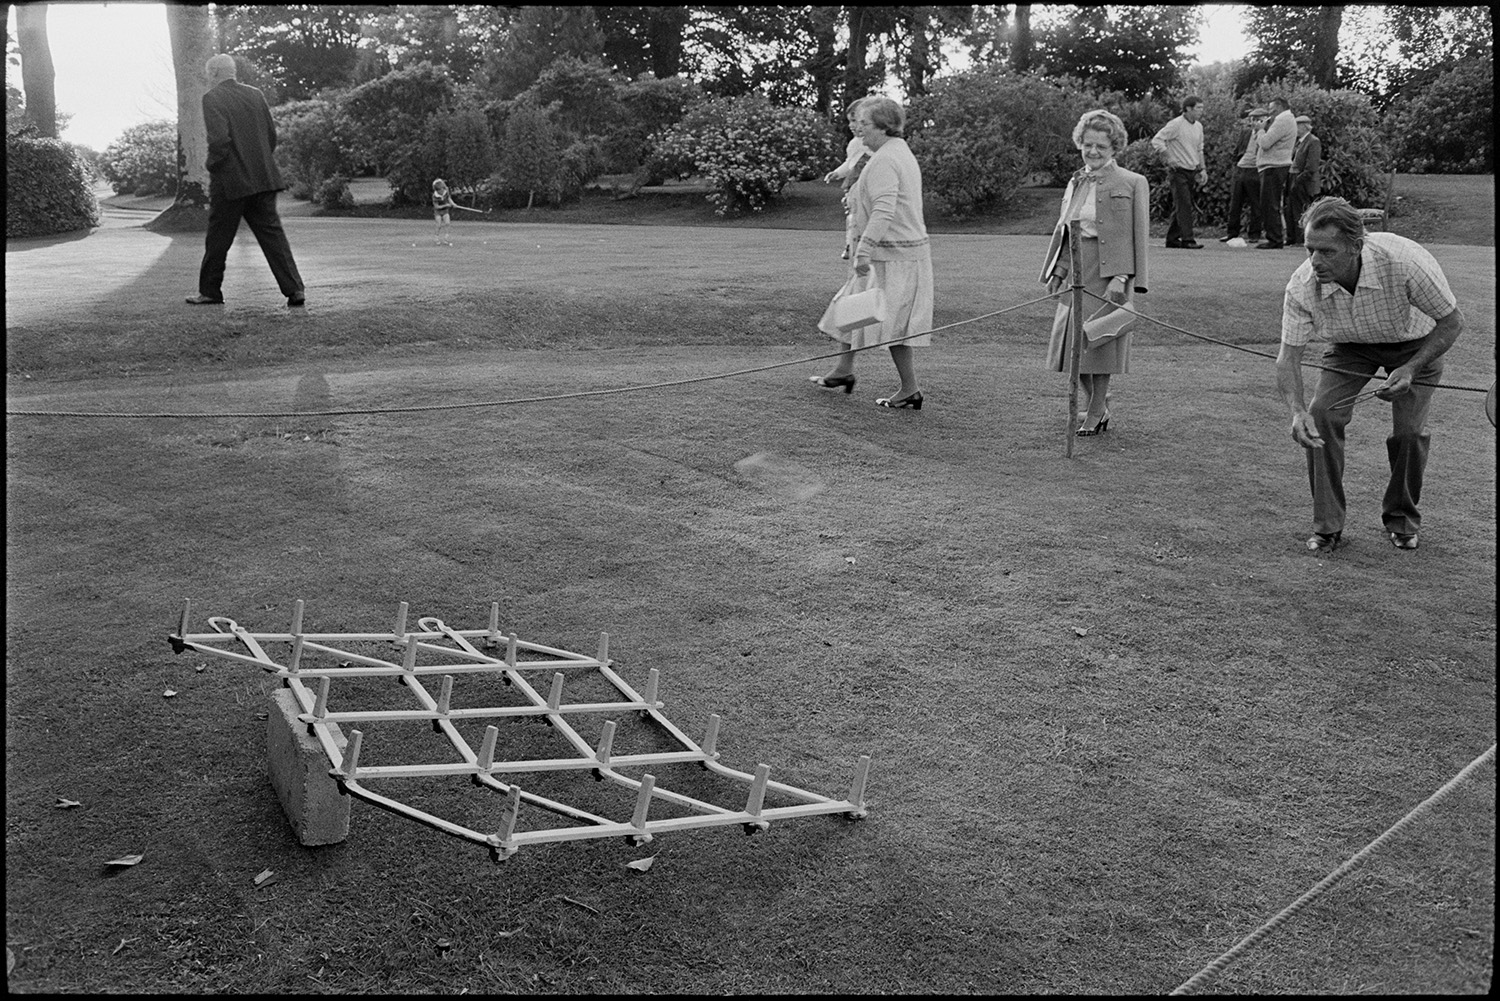 Sideshows at garden fete, bowls,  hoop la, billiards, golf. 
[A man playing hoop-la at a fete at the Old Rectory, Merton. A woman is watching him and in the background a group of men are talking by a trees and a child is playing with a golf club.]